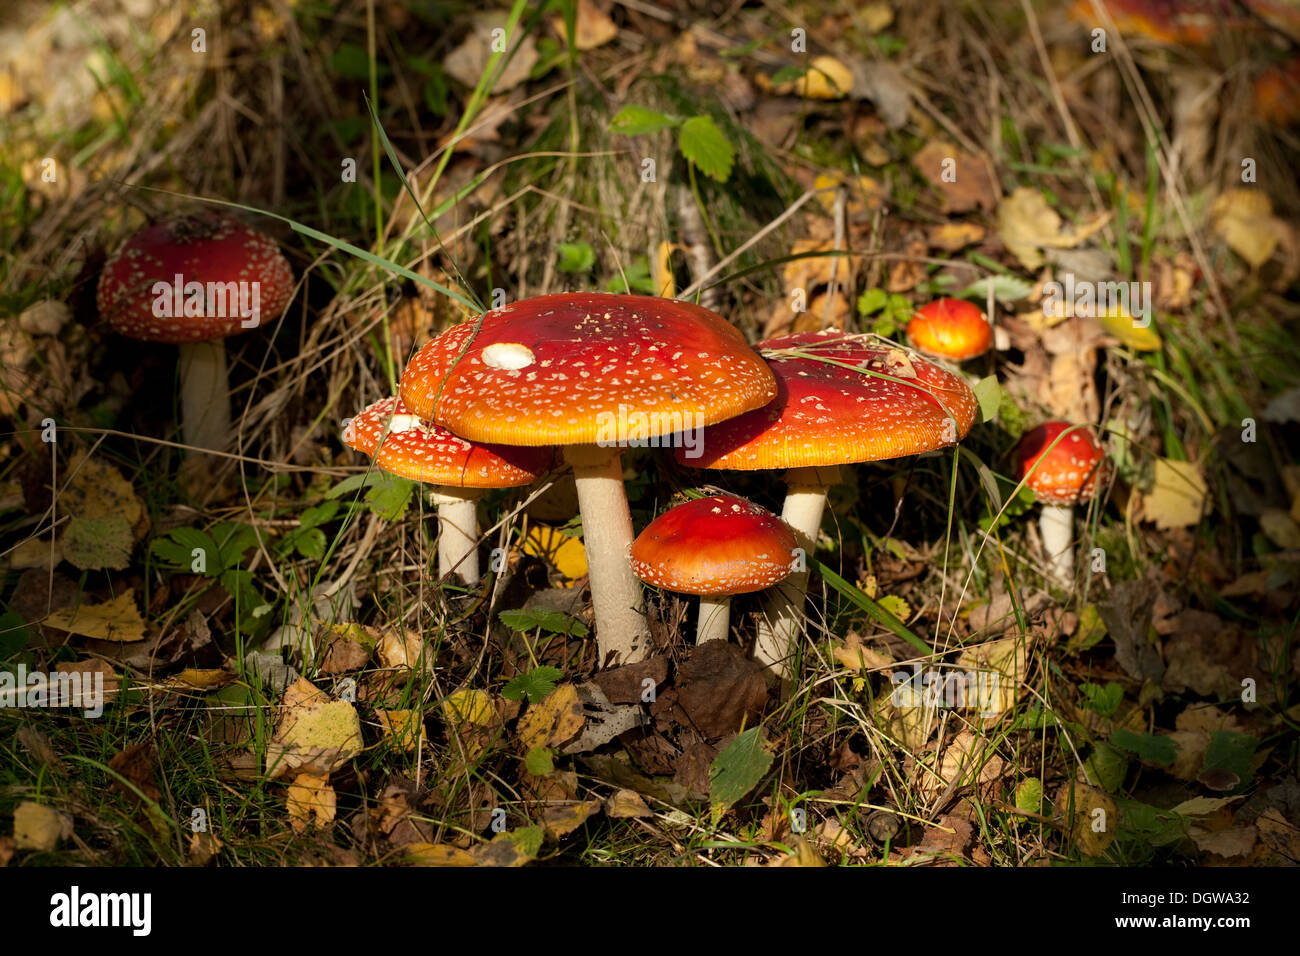 not edible mushrooms (Amanita muscaria) in forest Stock Photo